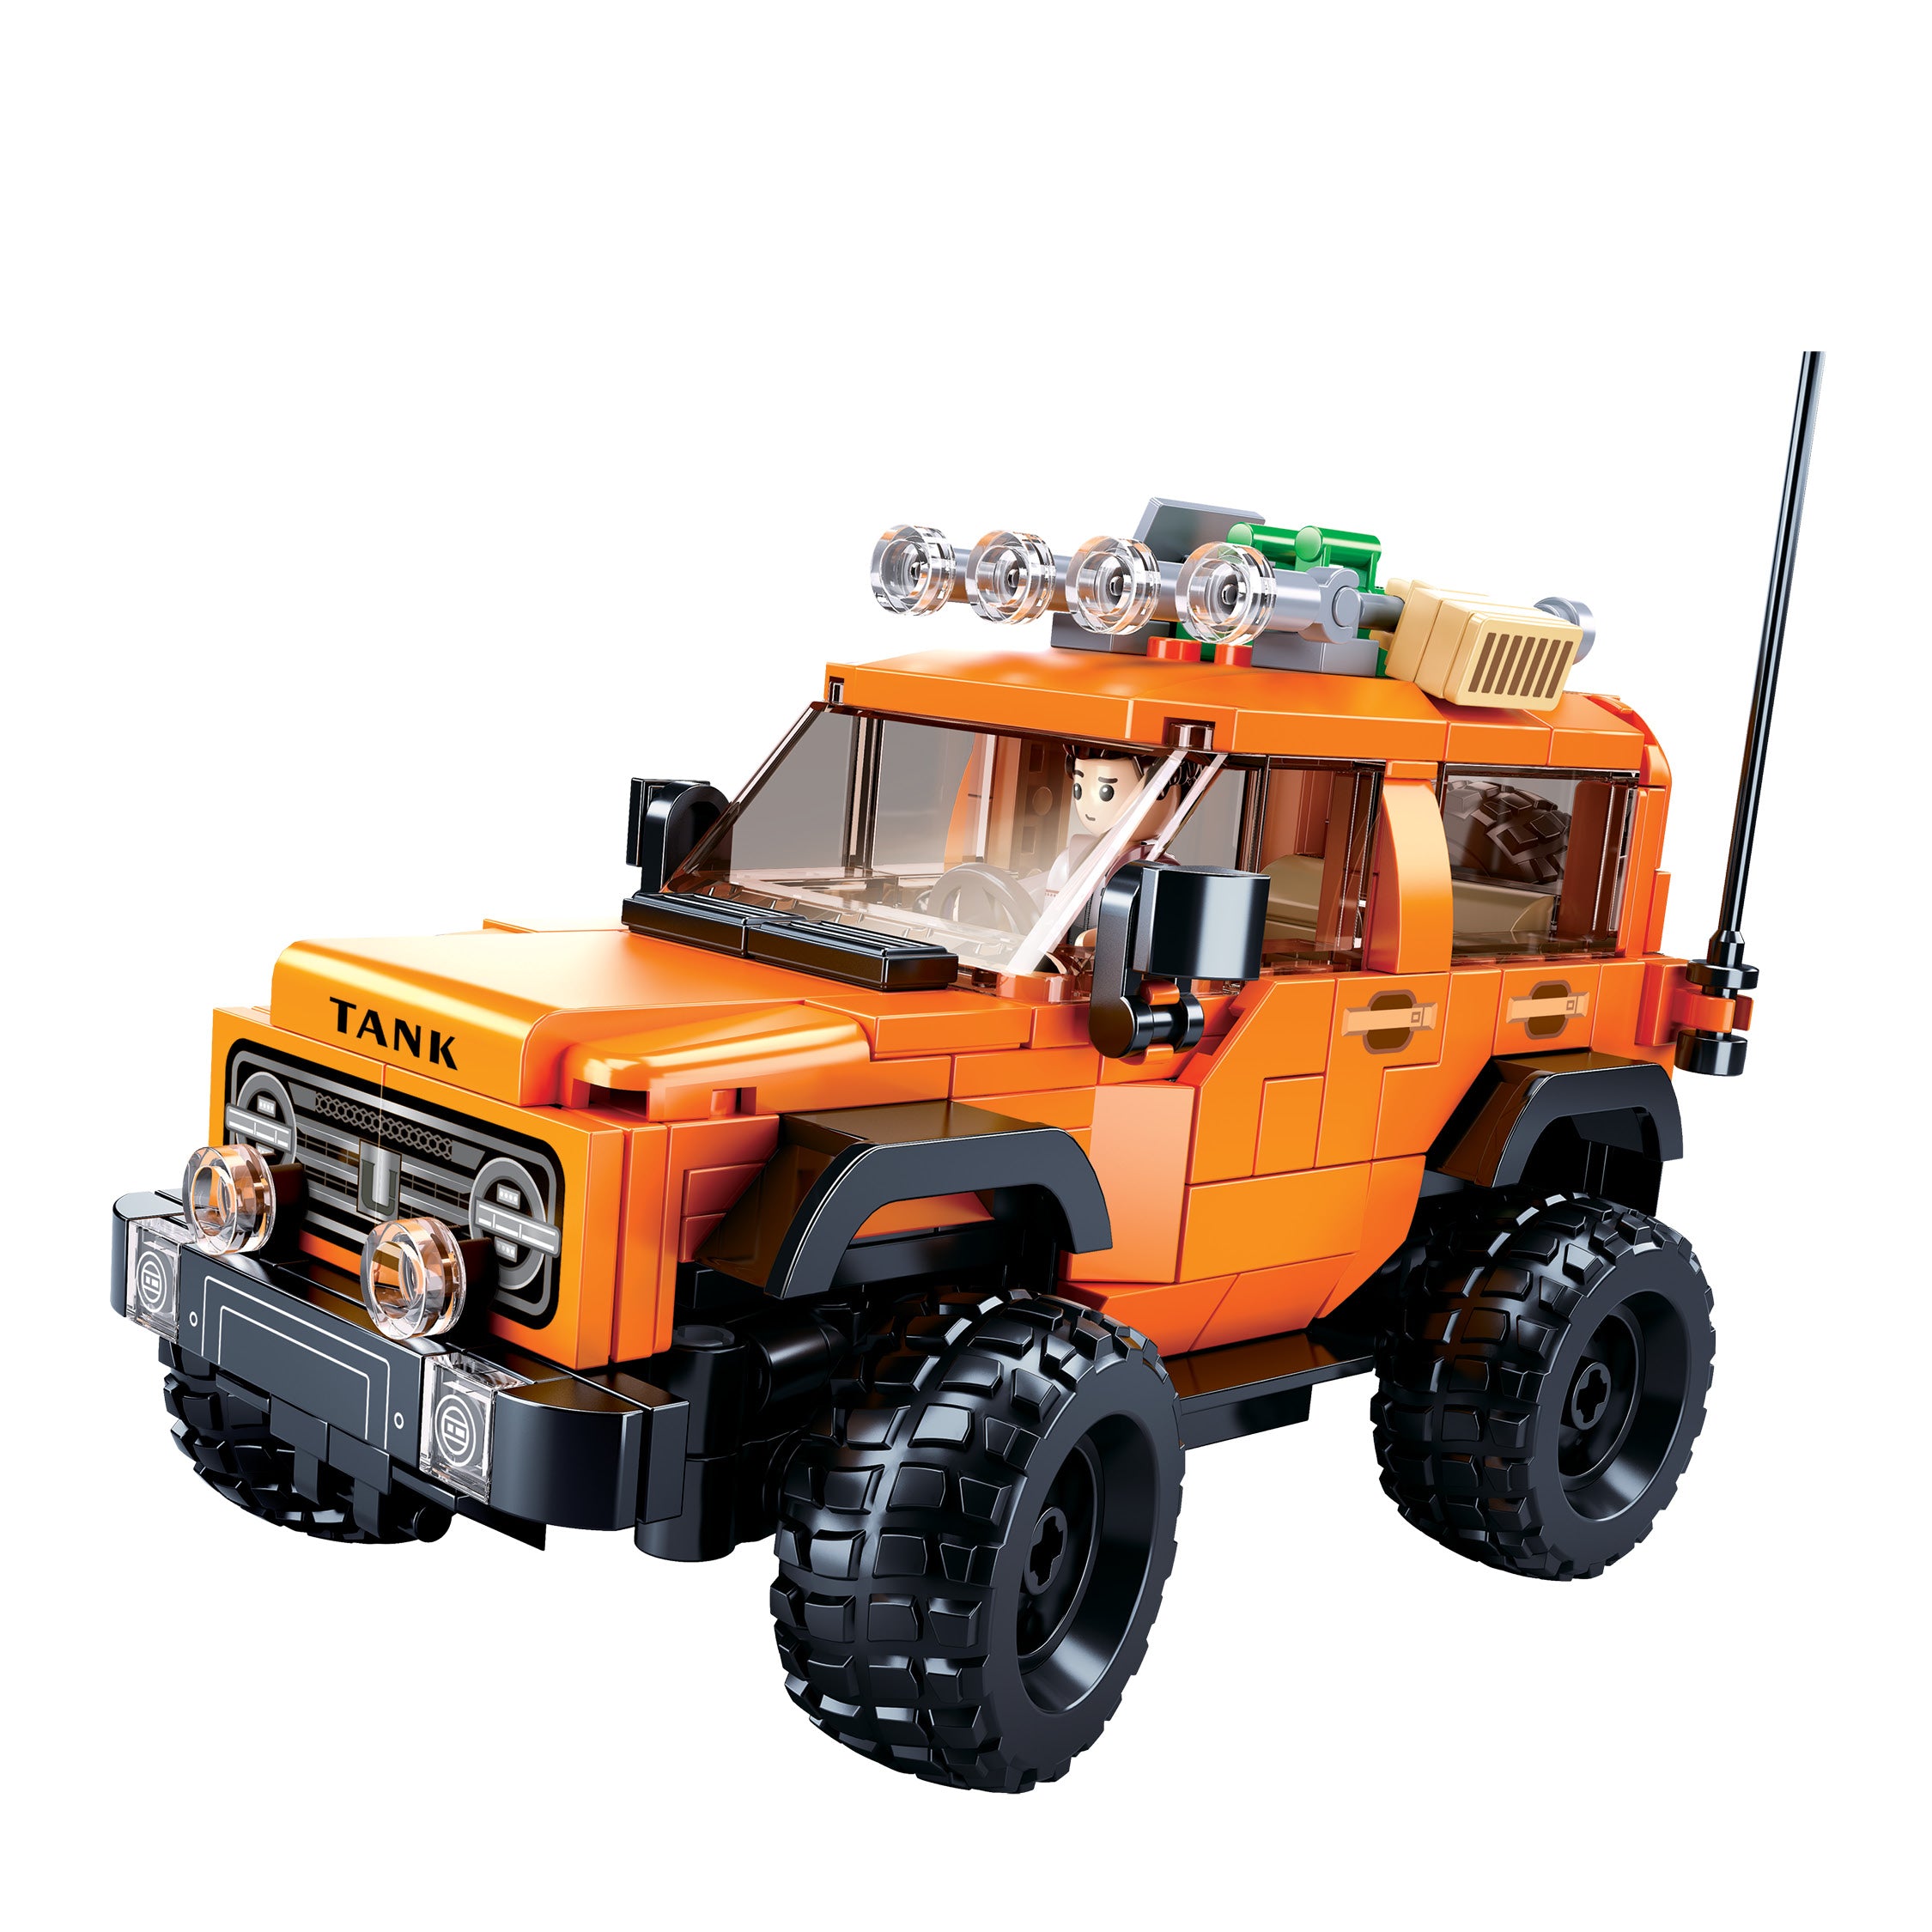 Sluban® Modelbricks-Tank 300 Suv (M38-B1013) (302 Pcs) Building Blocks Kit For Boys And Girls Aged 8 Years And Above Creative Construction Set Educational Stem Toy, Blocks Compatible With Other Leading Brands, Bis Certified.